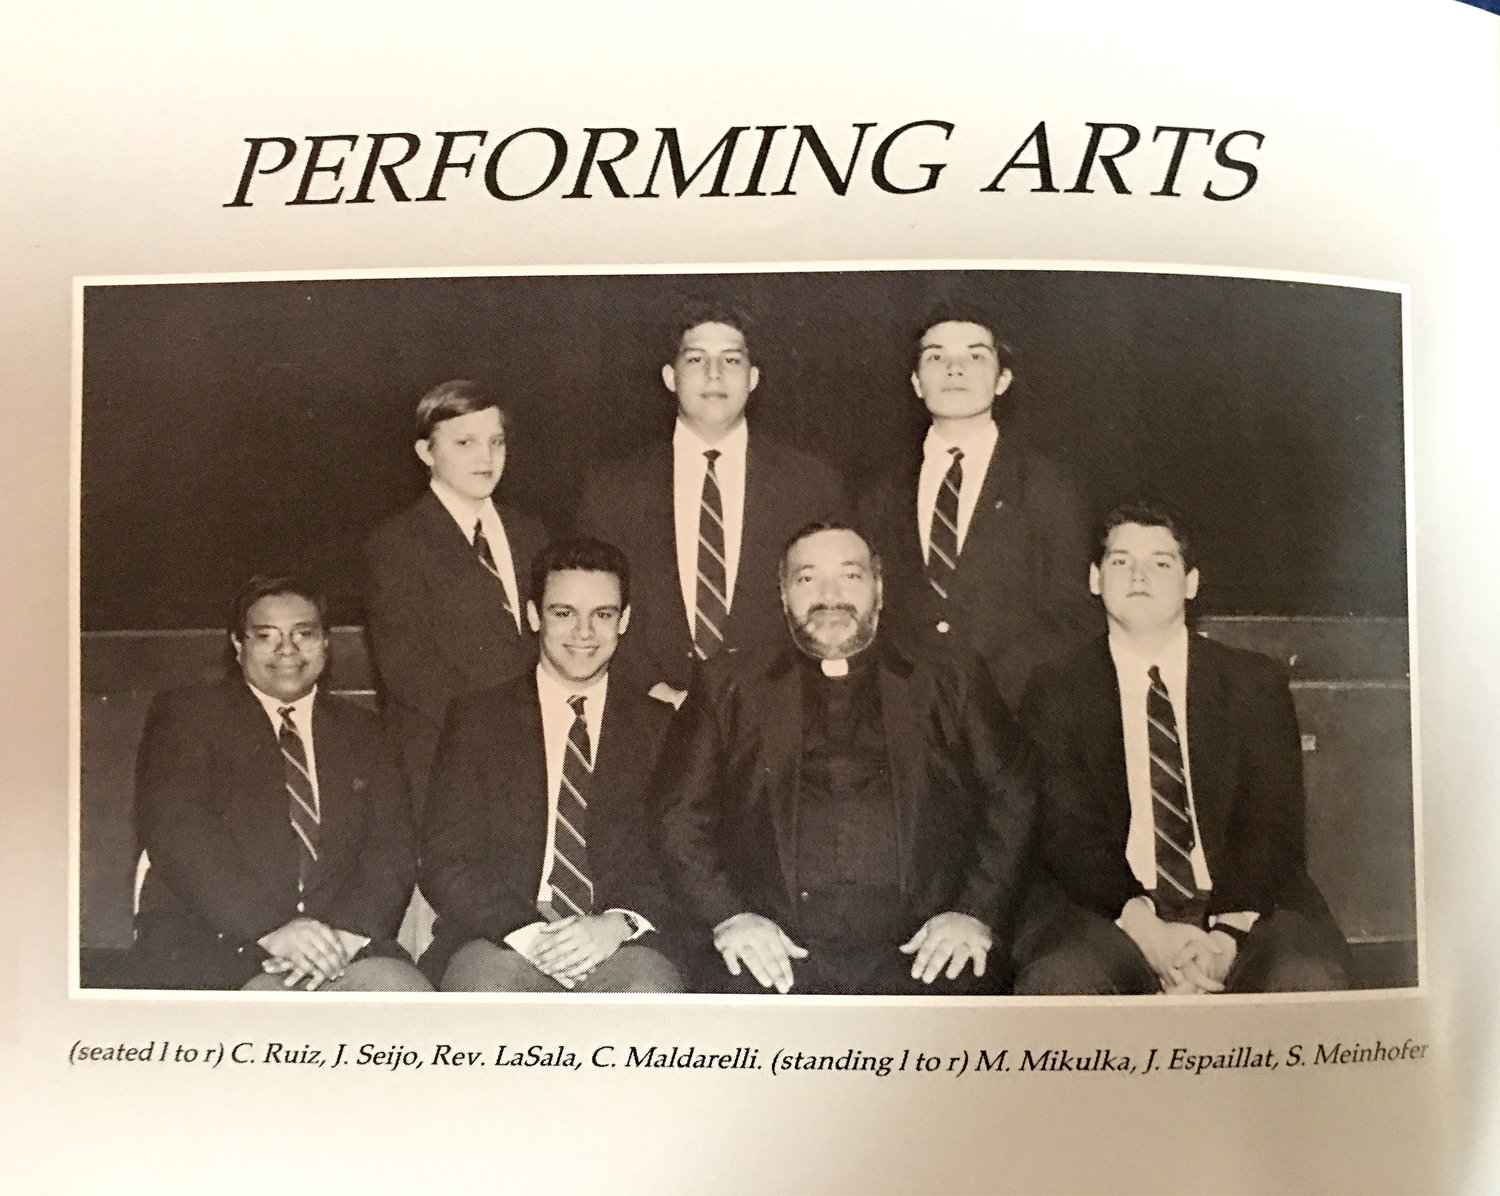 In the Performing Arts group at Cathedral Prep, he’s in the top row, middle (seated in bottom row is Father Salvatore LaSala).